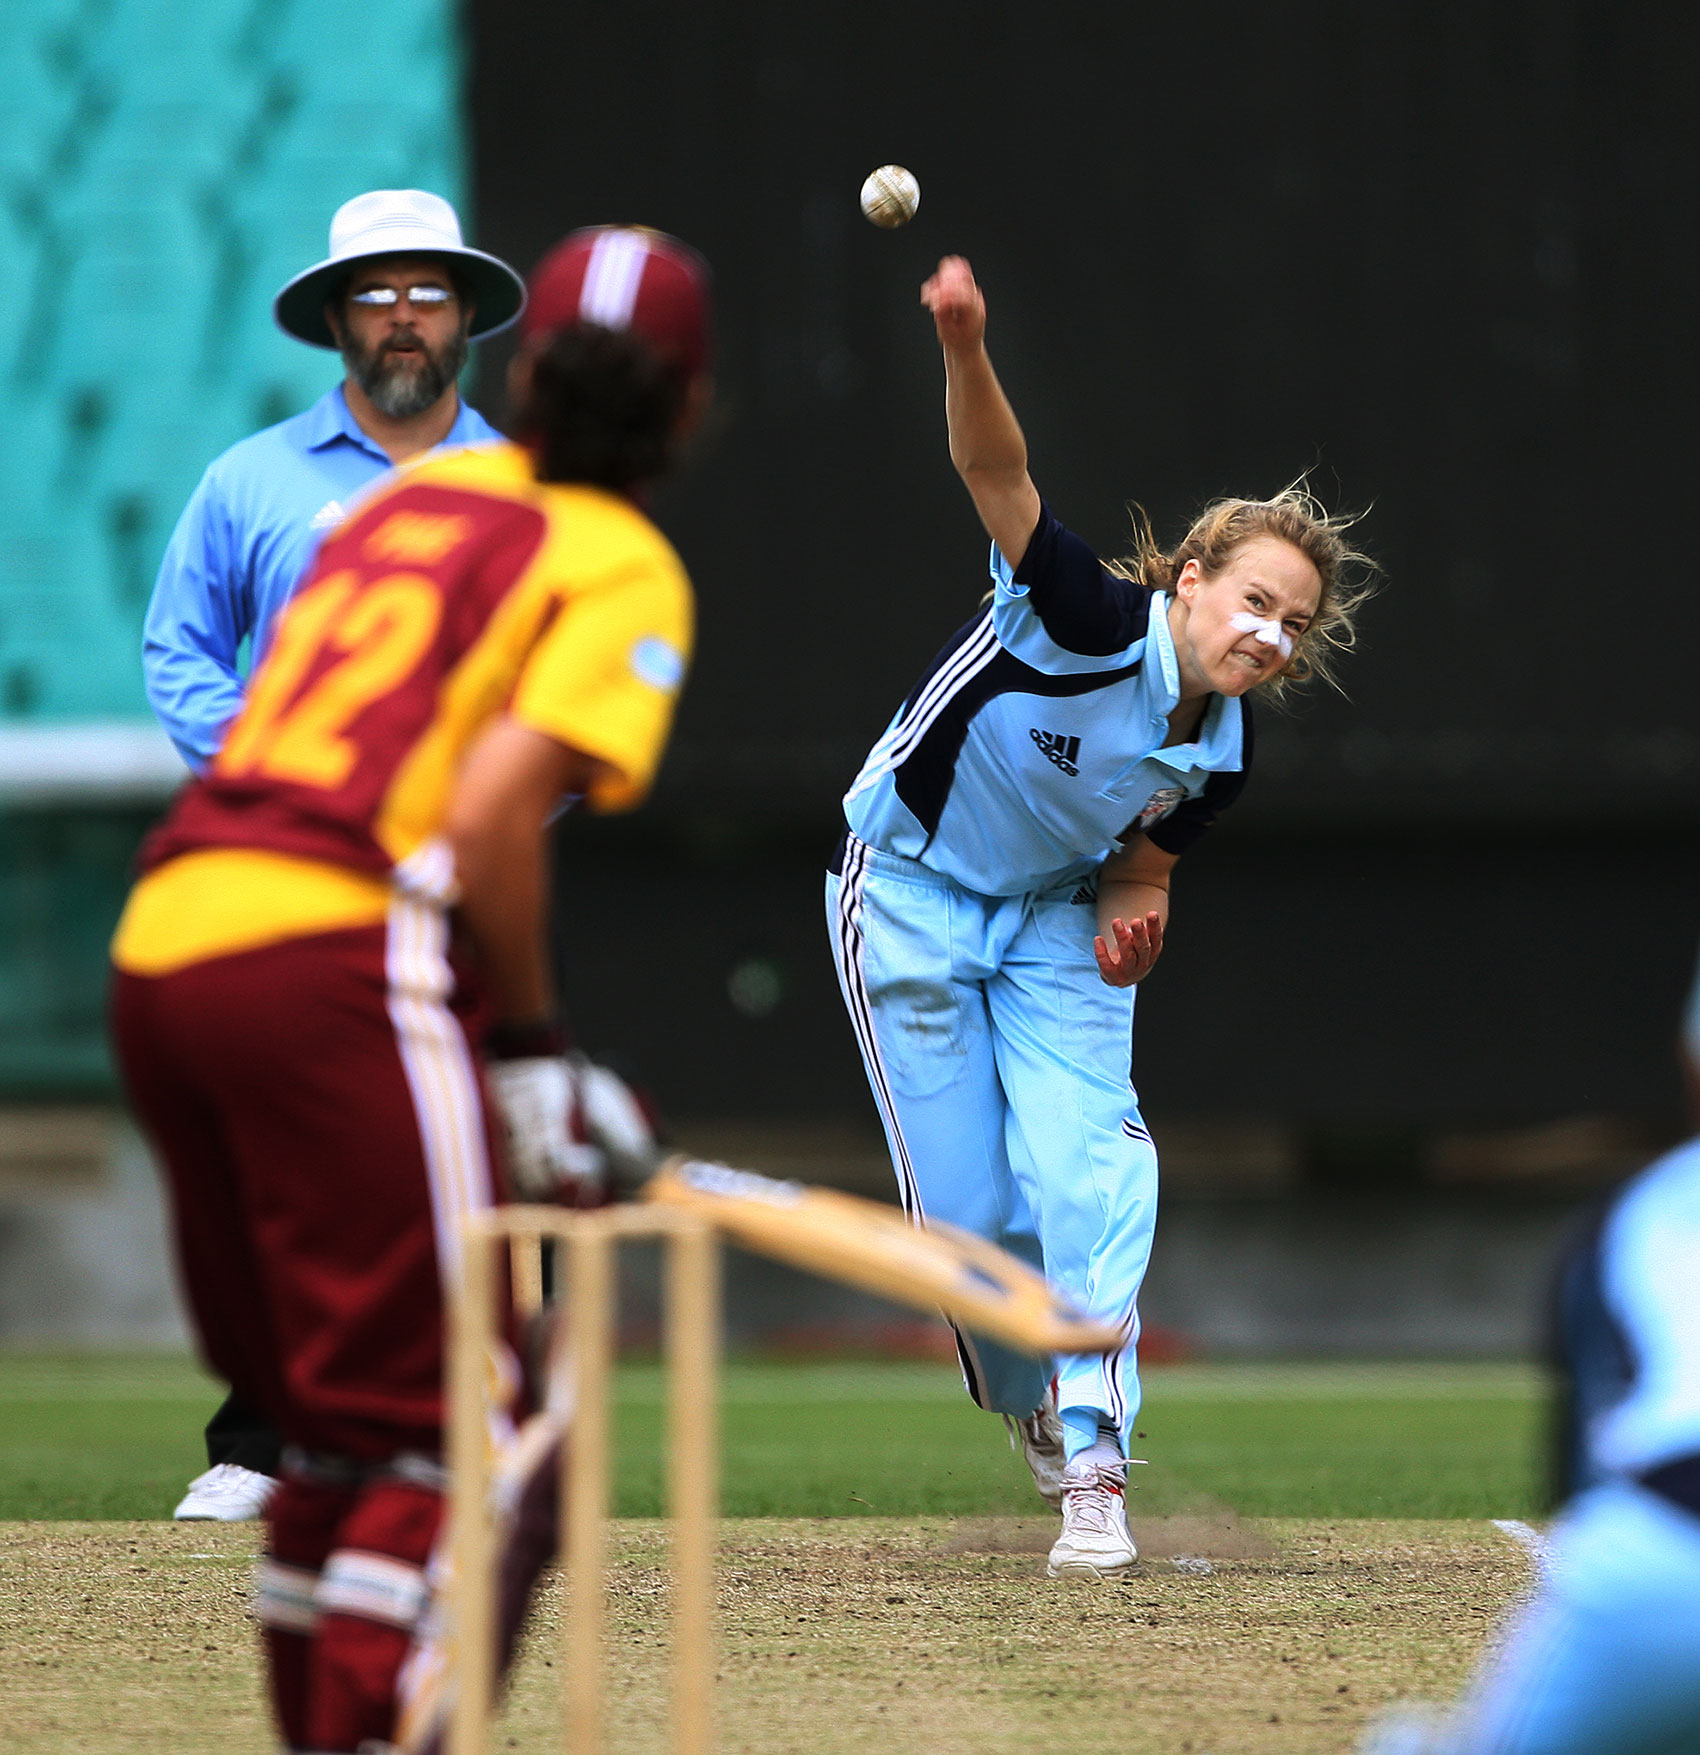   CRICKET- Womens Cricket - NSW Breakers v QLD Fire at the SCG. Ellyse Perry in action for NSW. She finished with 2 for 43 off her 10 overs. pic. Phil Hillyard  